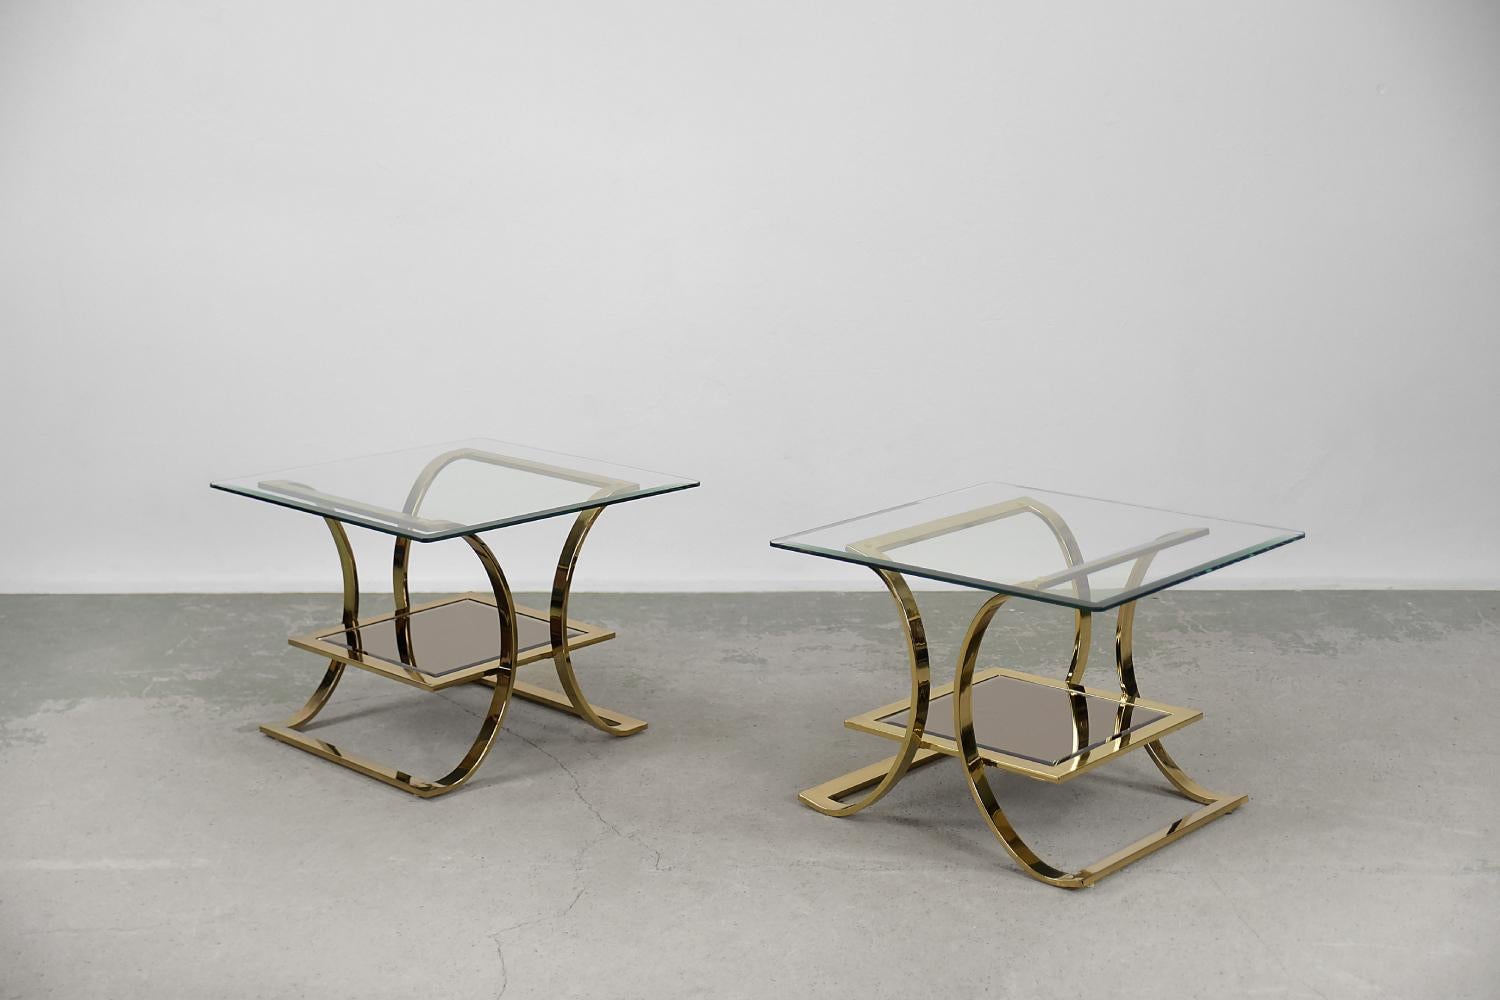 This pair of glass tables was produced in Italy during the 1960s. The upper glass is transparent and the lower glass is mirrored. The base is made of a hand-bent gold-colored metal. The tables are slightly different from each other in size. This set